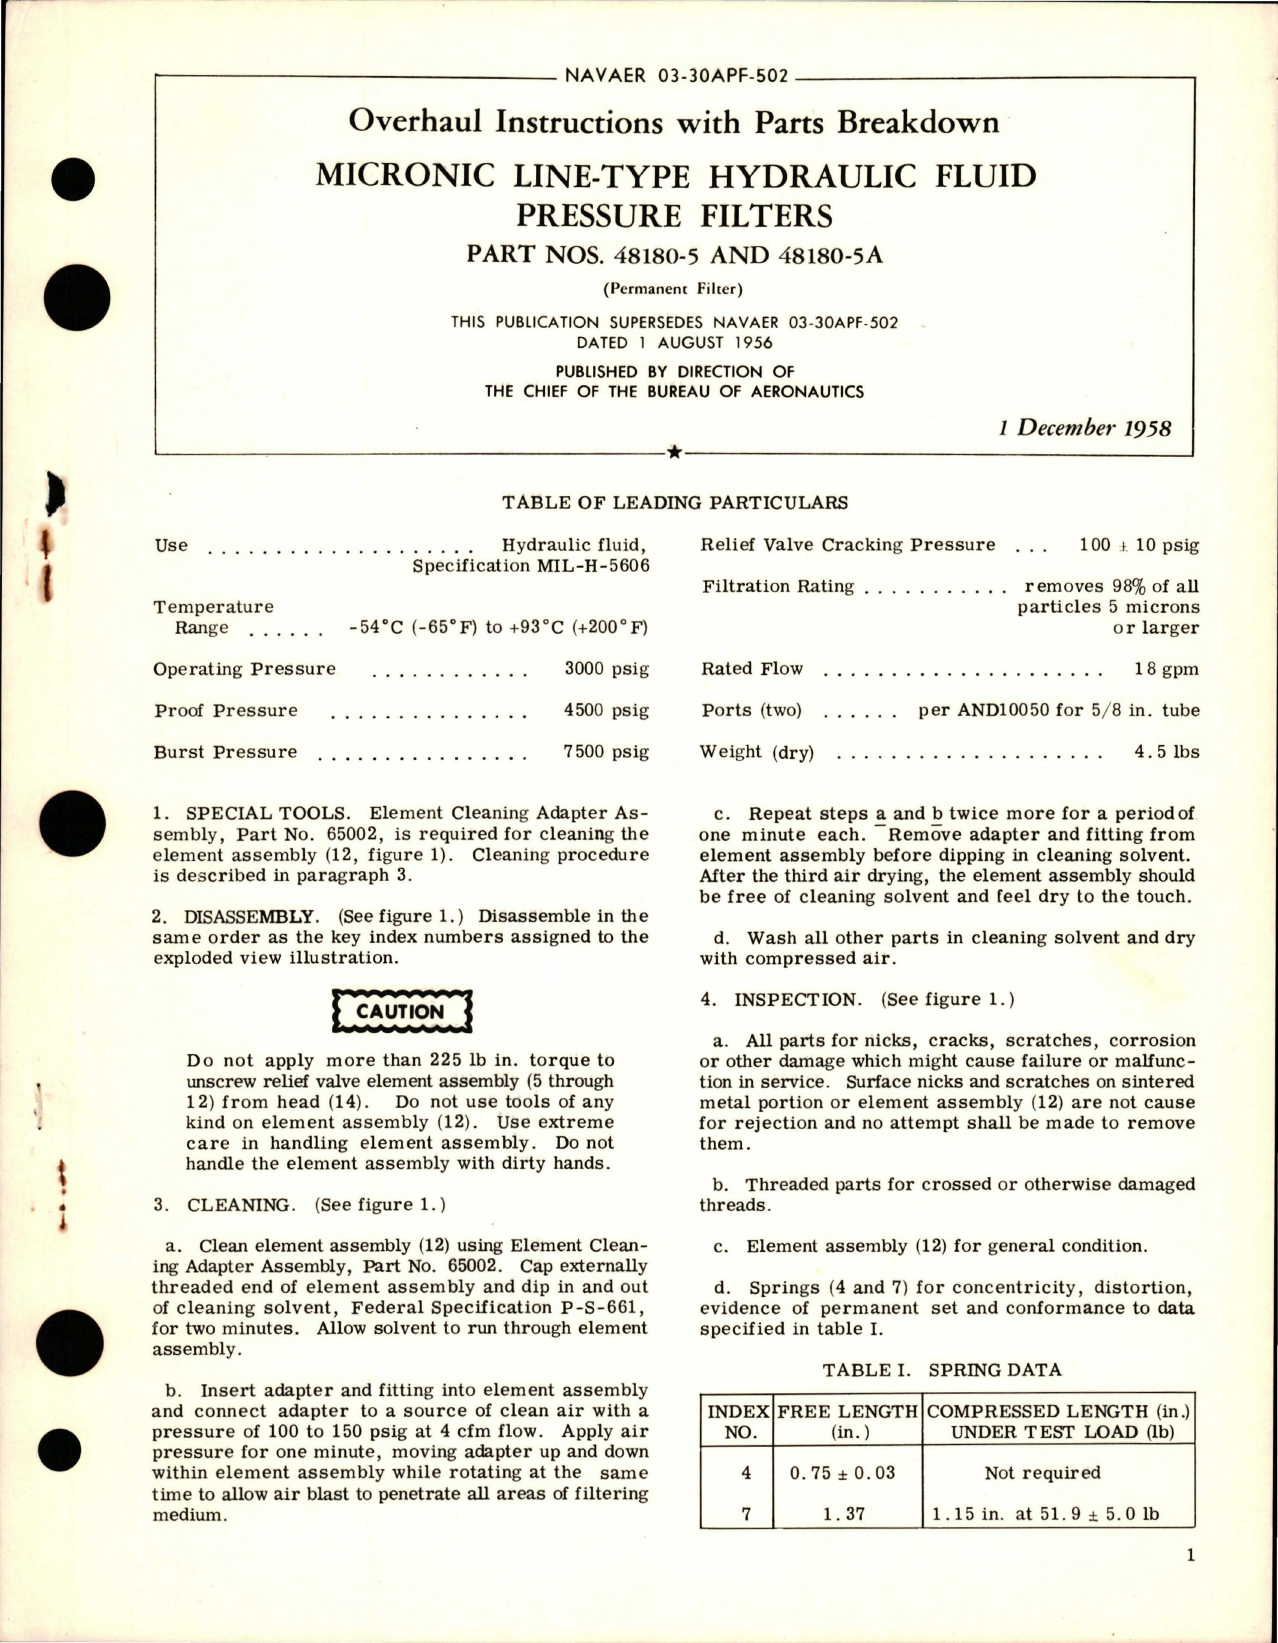 Sample page 1 from AirCorps Library document: Overhaul Instructions with Parts Breakdown for Micronic Line-Type Hydraulic Fluid Pressure Filters - Parts 48180-5 and 48180-5A